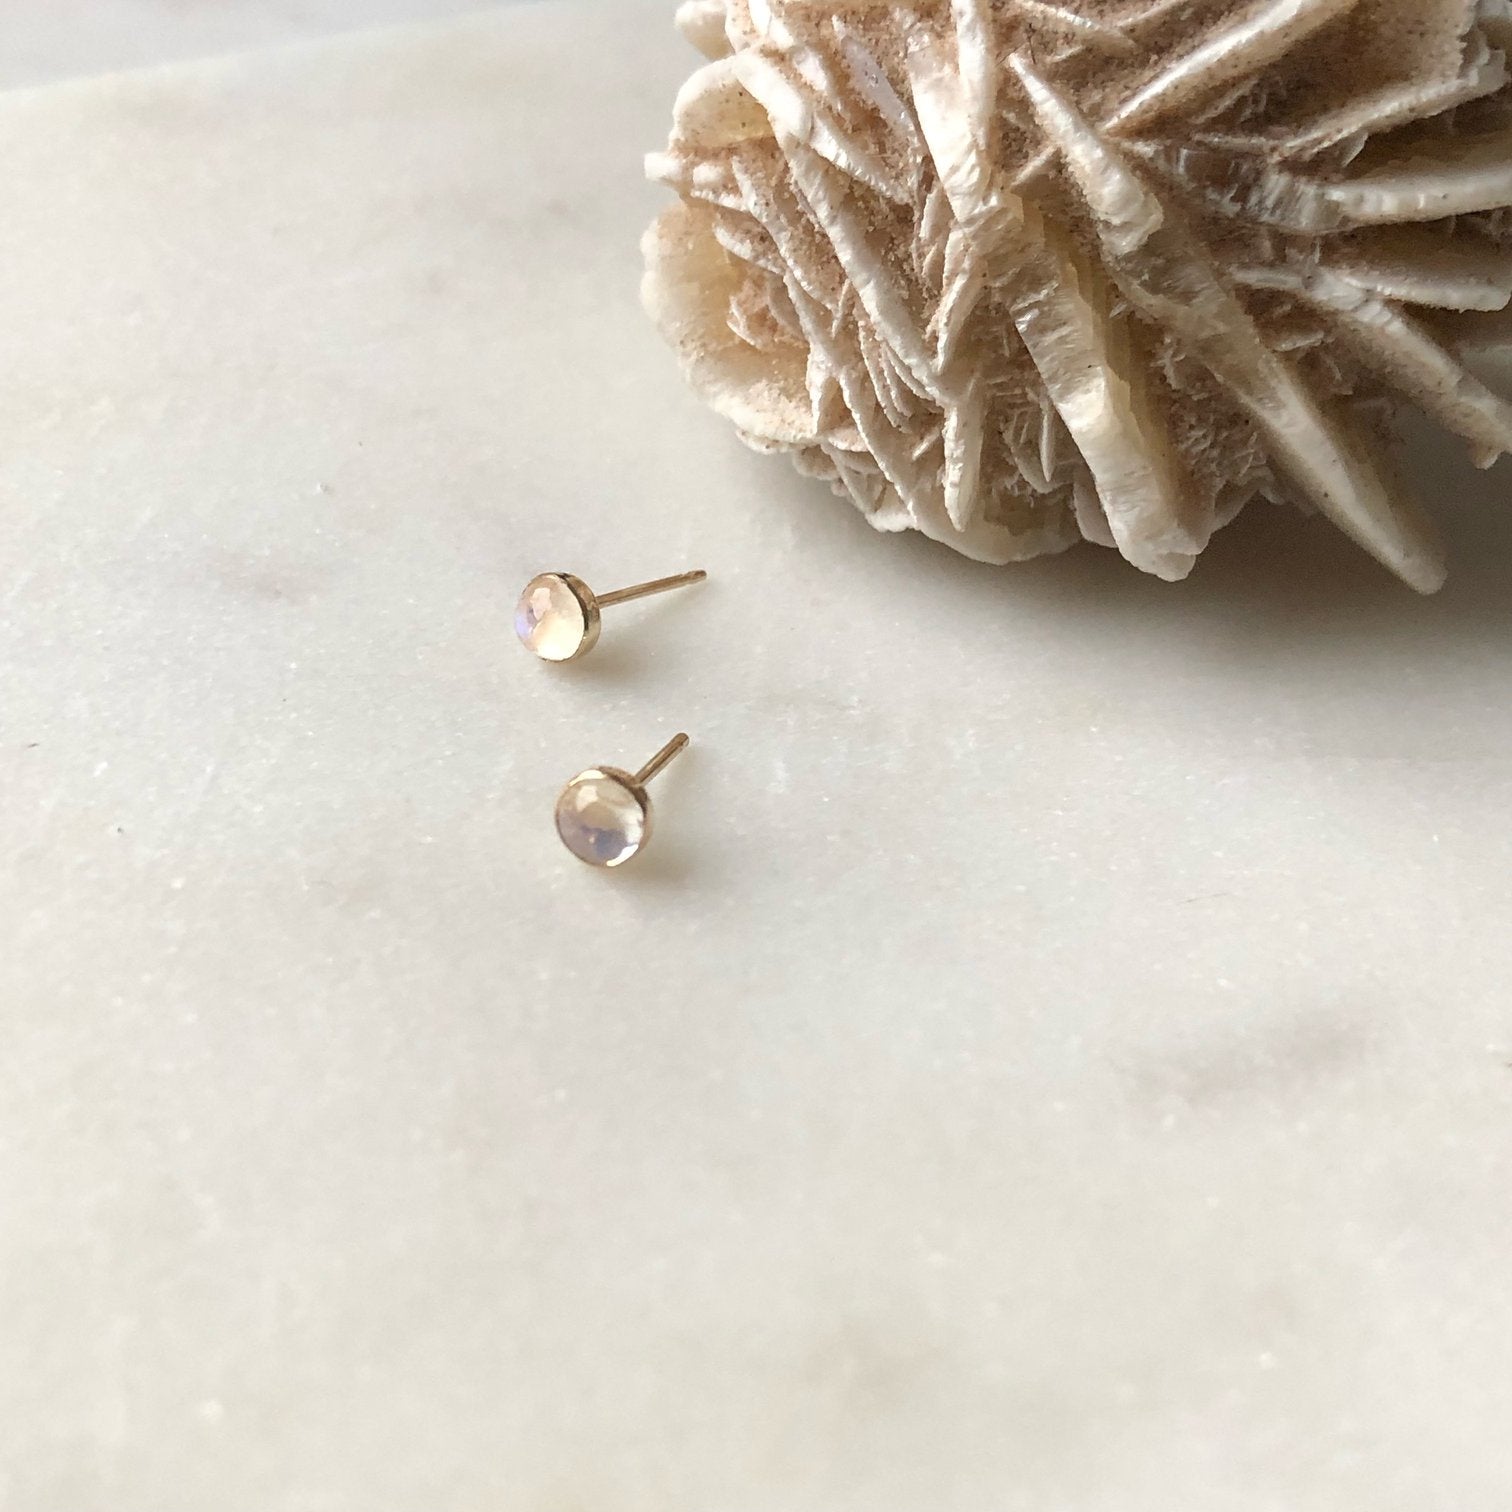 The Rainbow Moonstone Studs by Token Jewelry